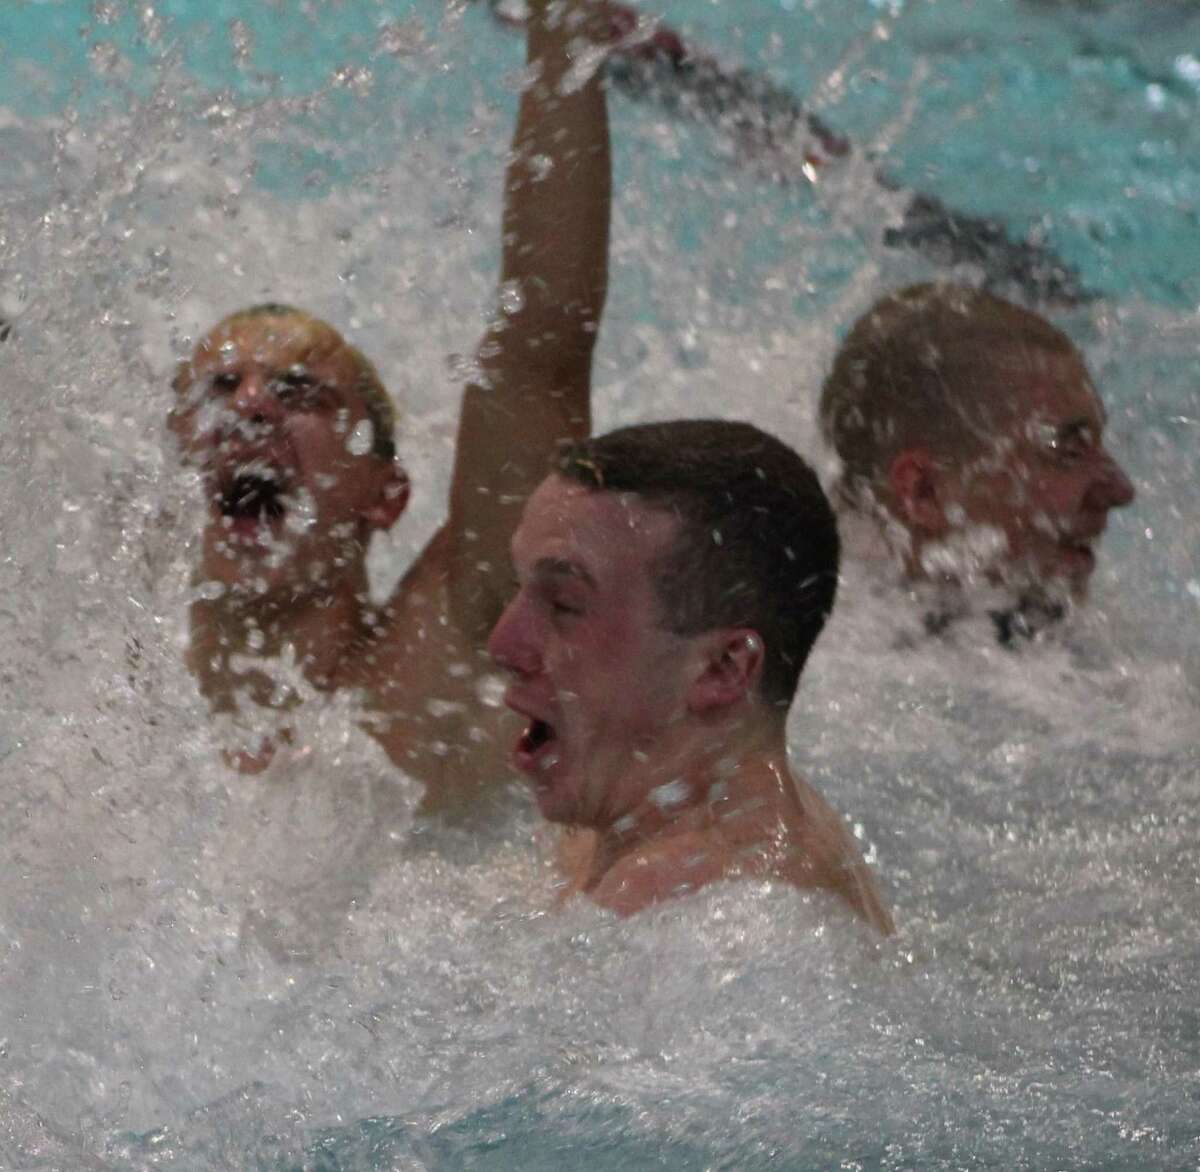 The Brookfield High School boys swimming and diving team celebrates its victory at the Class S state championships at Wesleyan University in Middletown March 16, 2017.